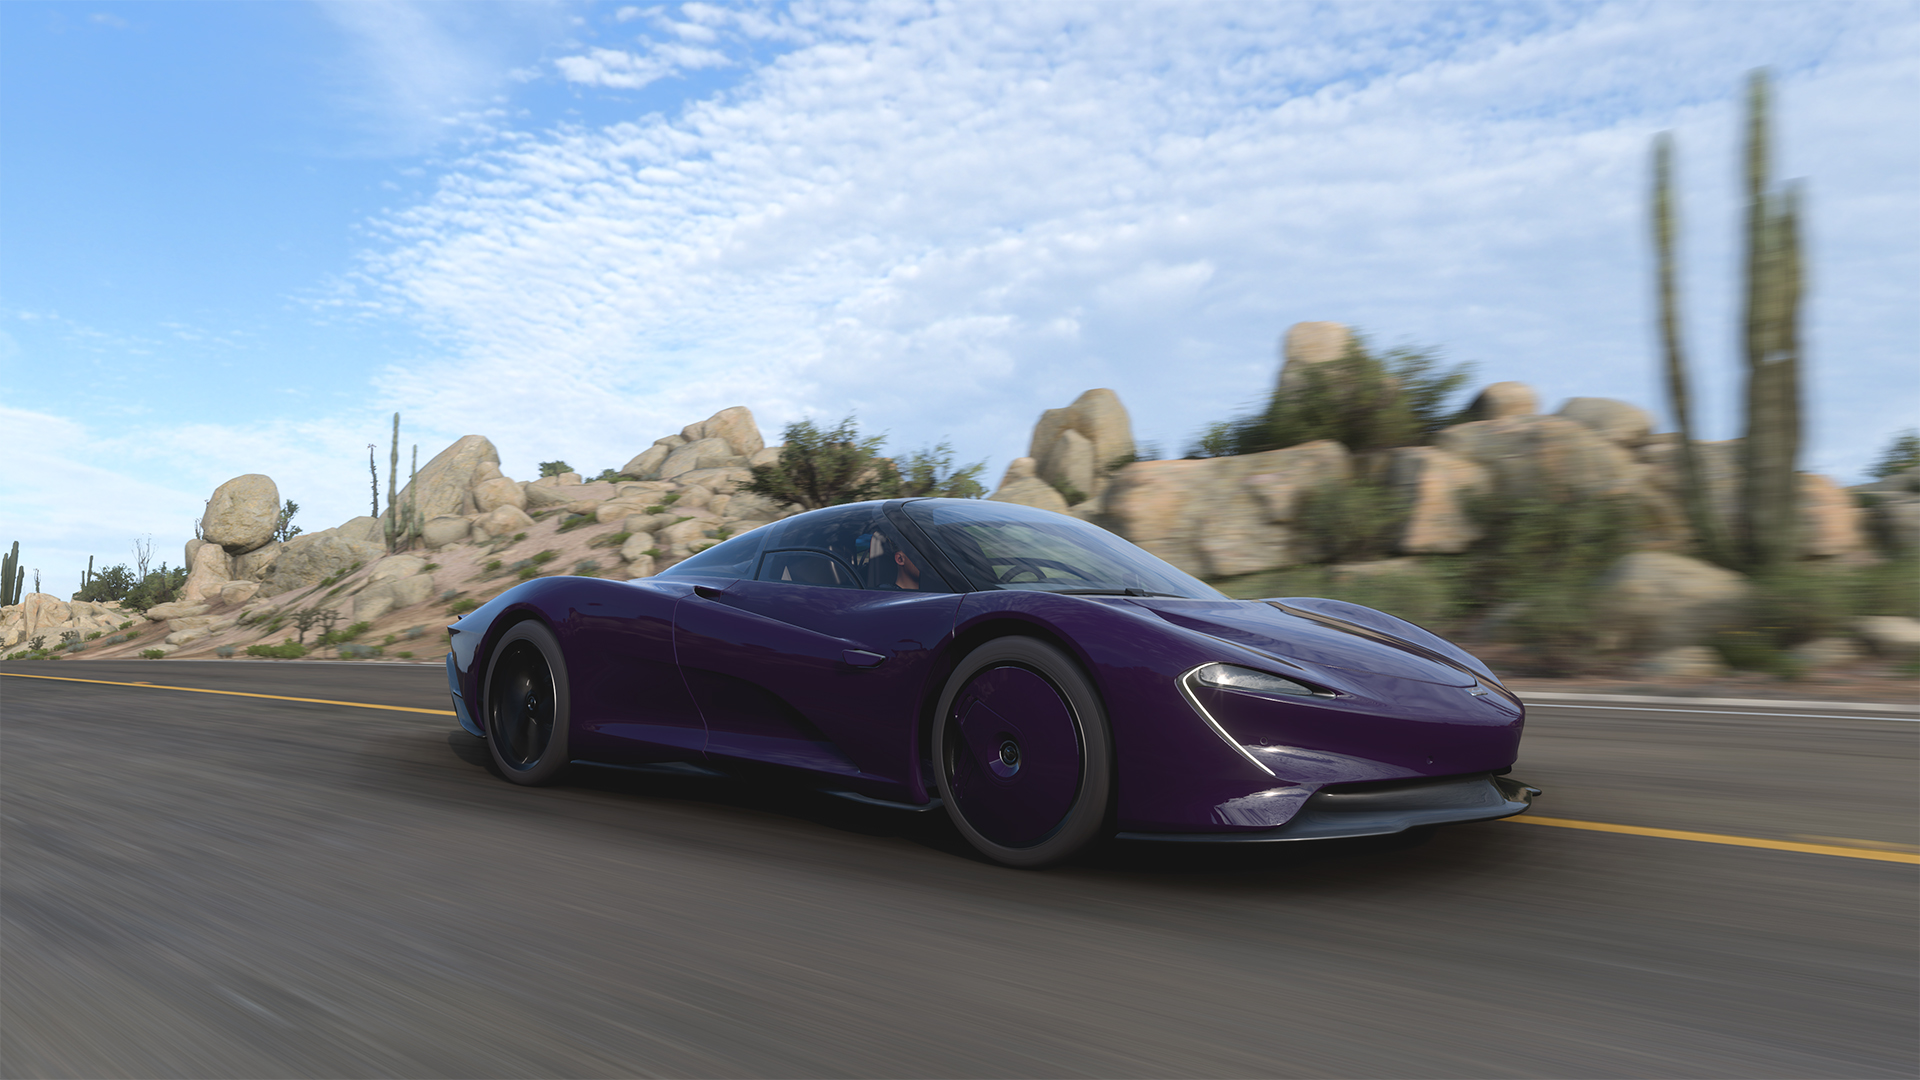 Forza Horizon 5 Series 27 Preview: Lucid Air Sapphire Stars in “American  Automotive” – GTPlanet